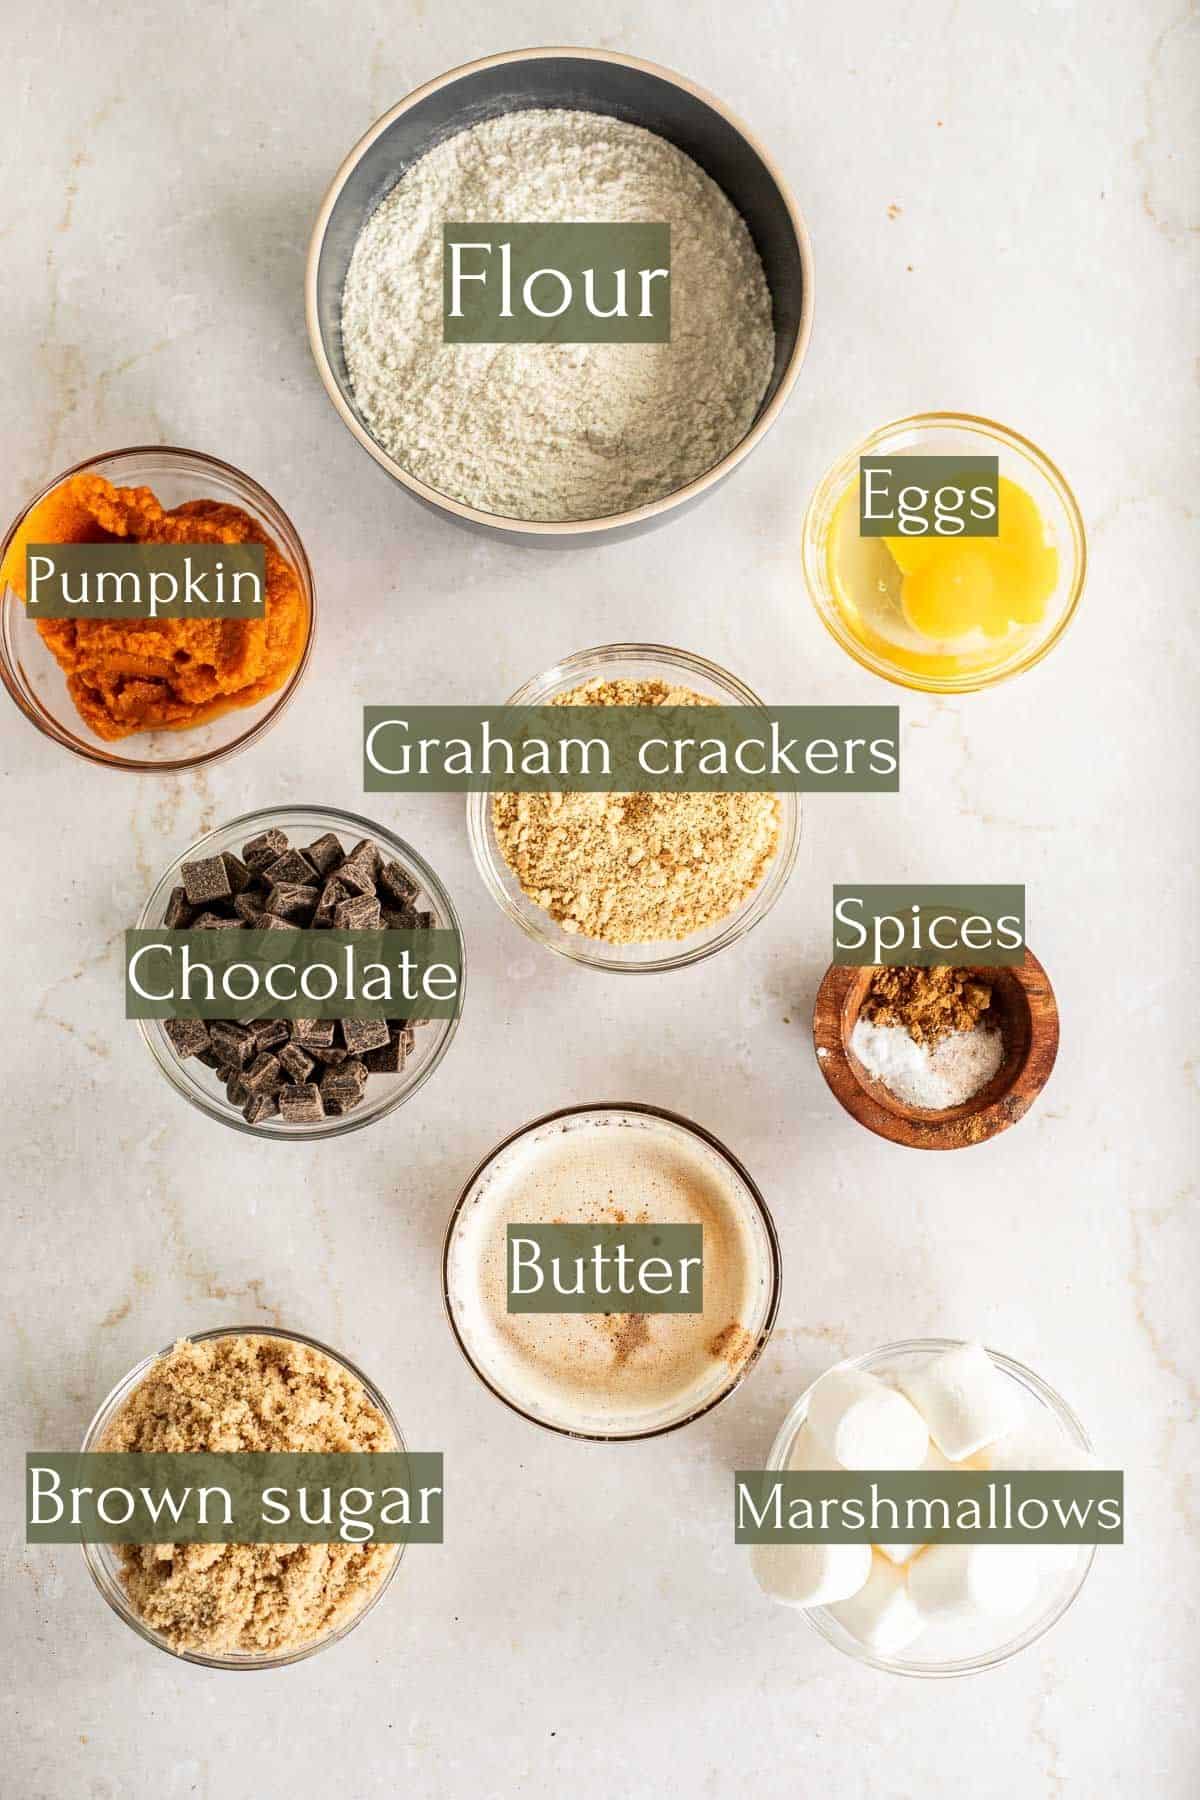 ingredients to make pumpkin s'mores cookies labeled with green text boxes.